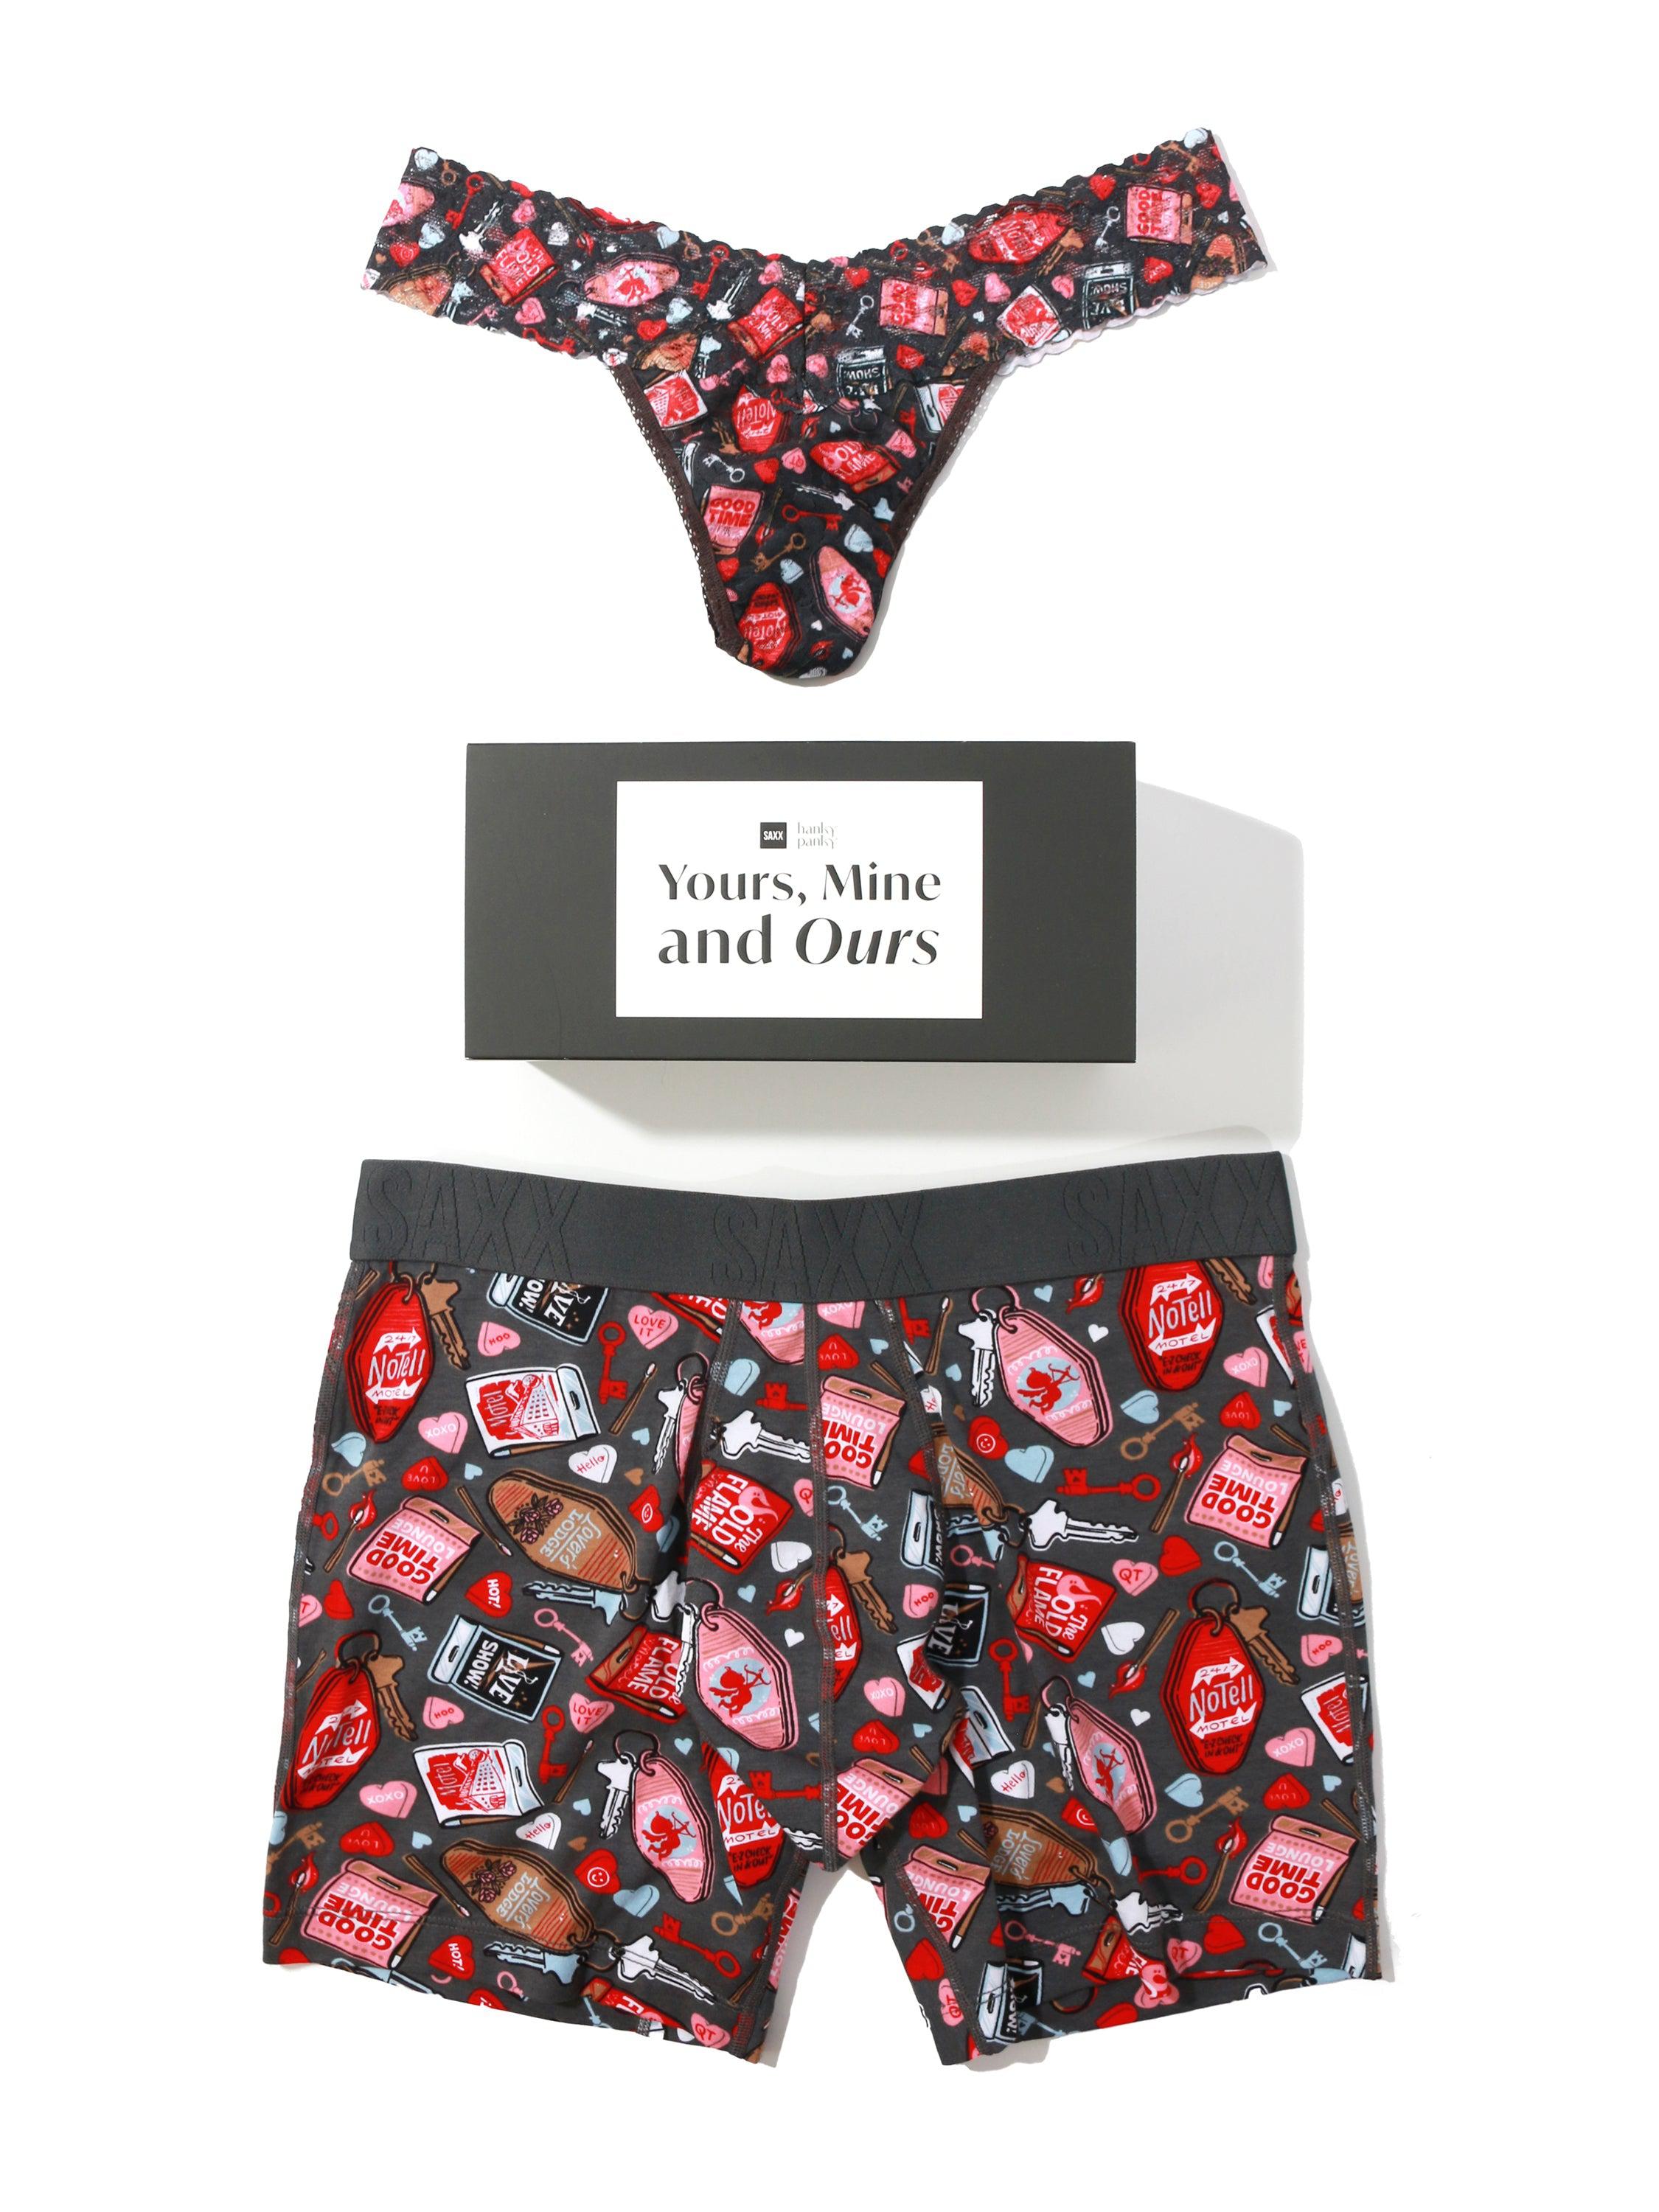 Your Lucky Day Sexy Couple Matching Underwear, Valentines Day Gift, Matching  Underwear Couple Set, His and Hers Underwear, Matching Undies -  Israel